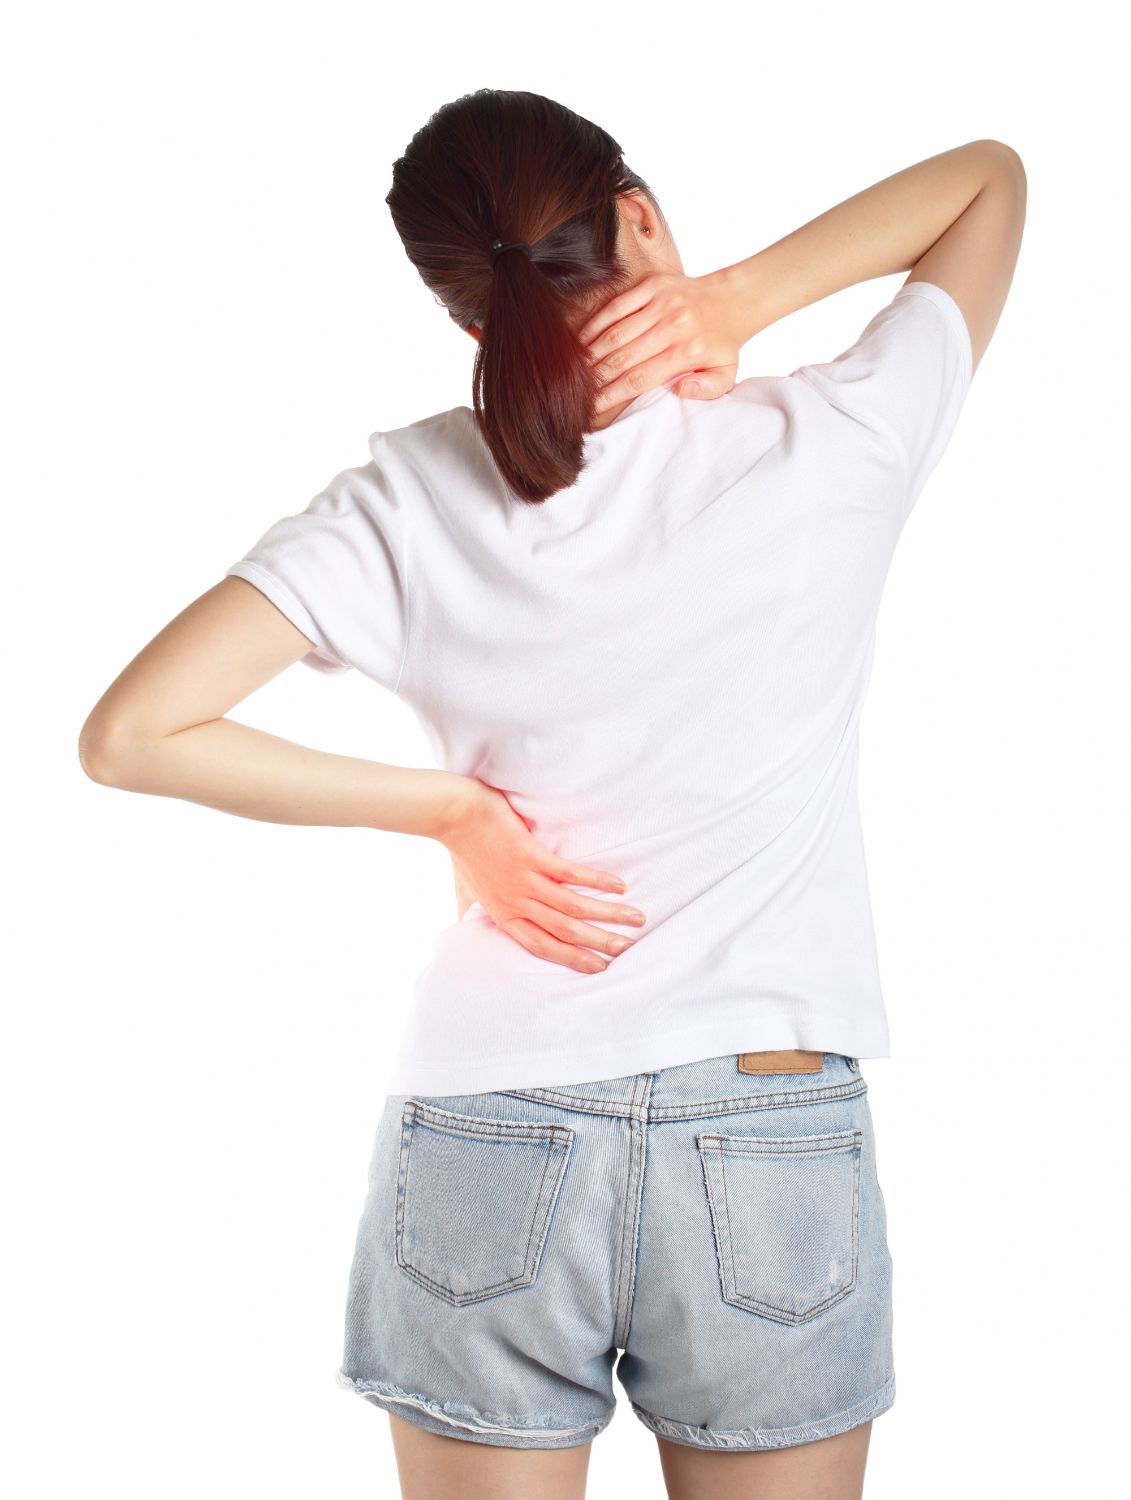 Back Pain Image - Active Health